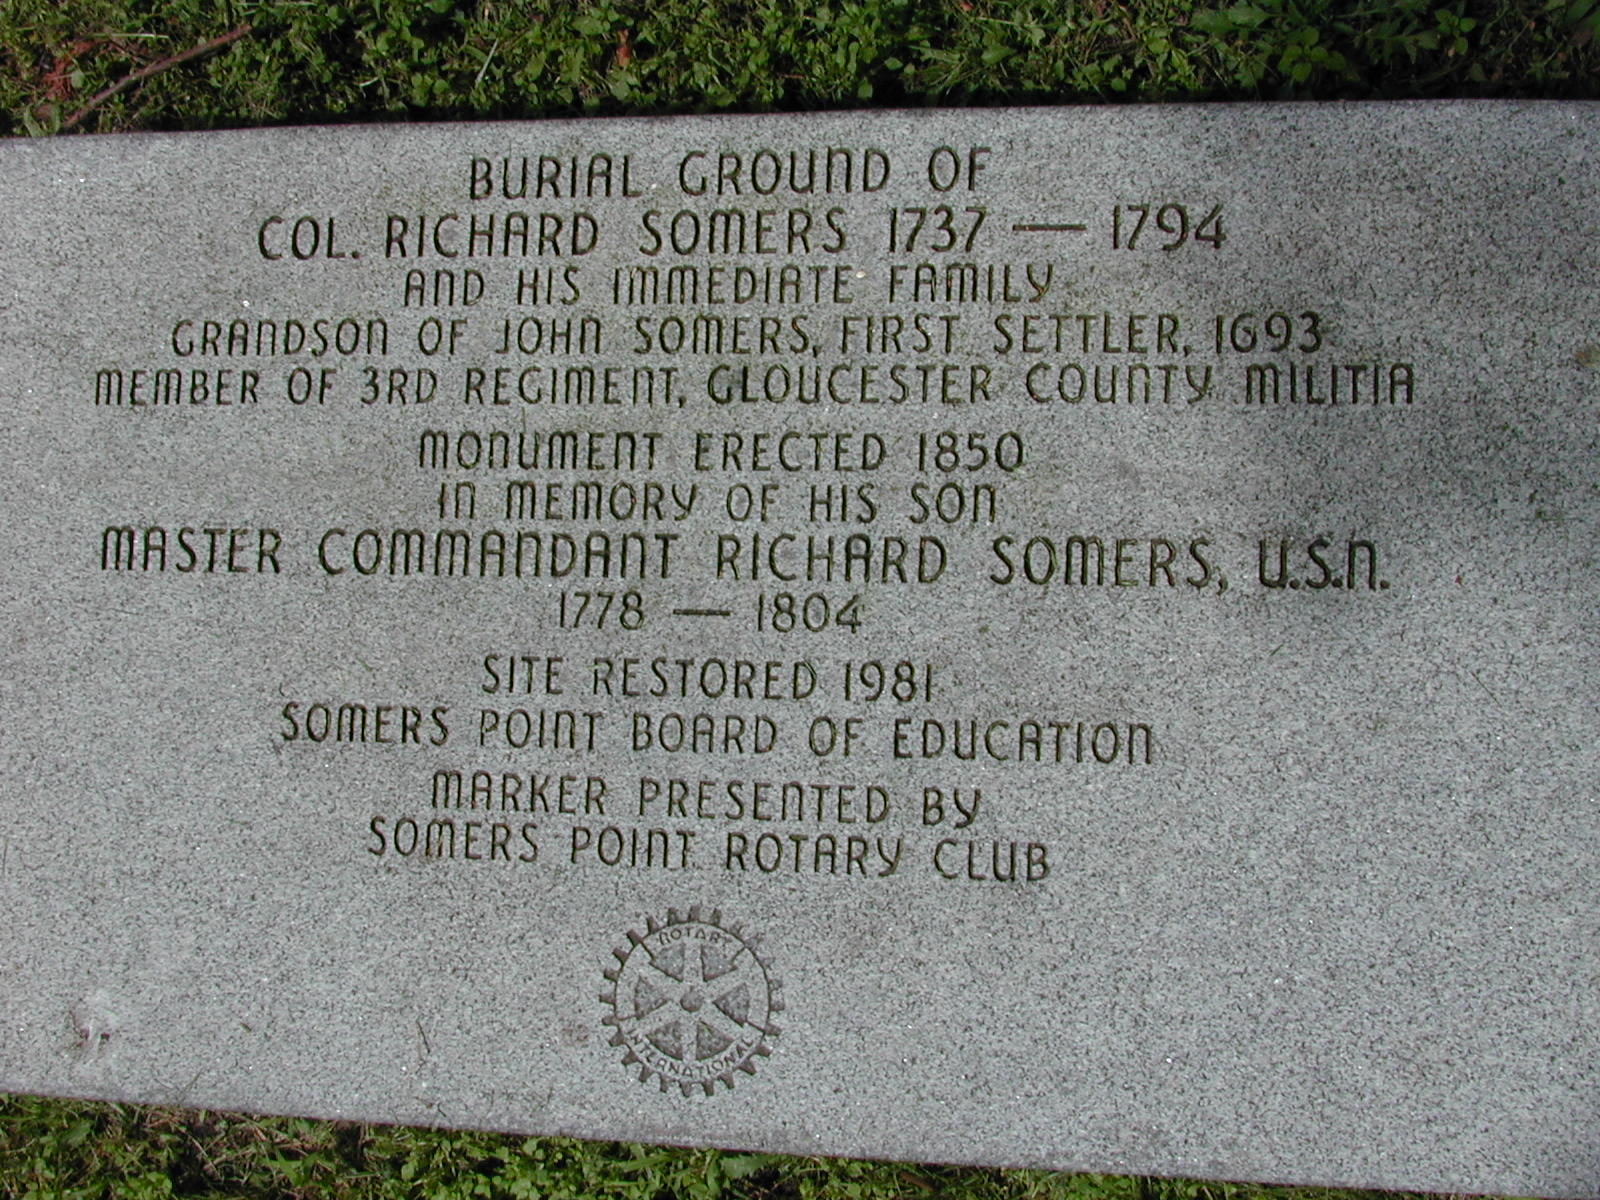 [Somers Burial Ground (NY Ave School) Image]